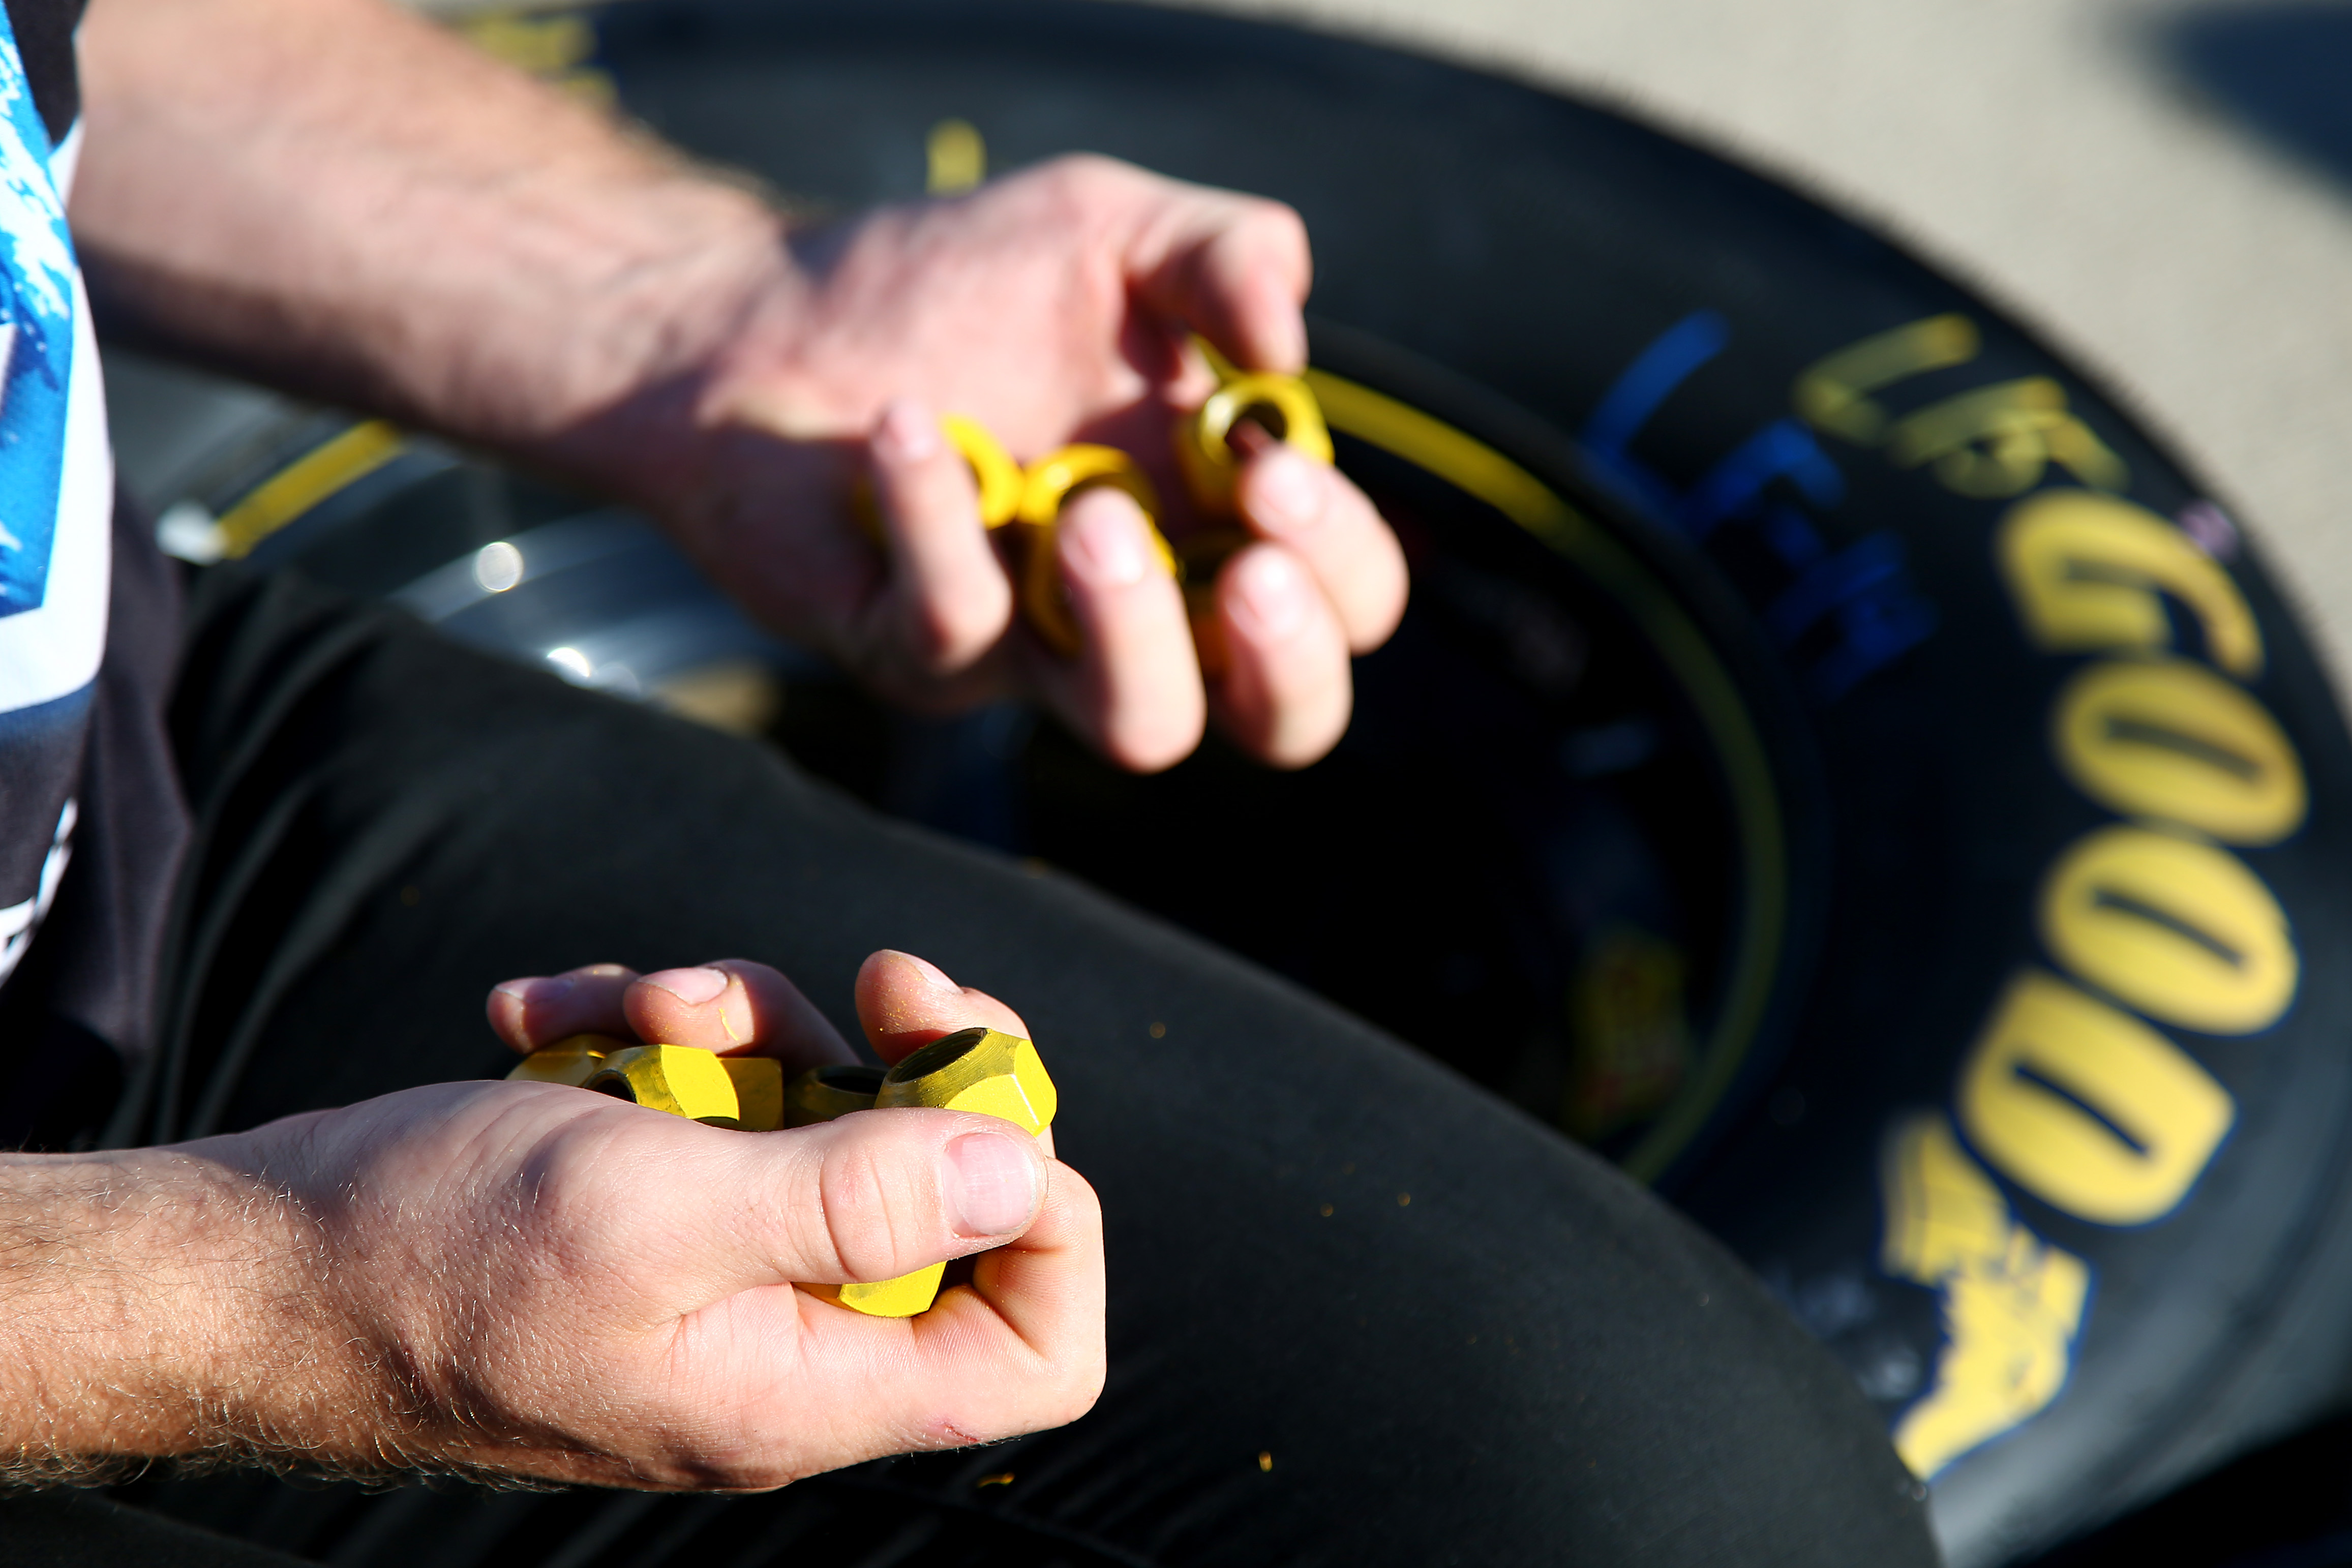 JOLIET, IL - SEPTEMBER 18: Detail view of lugnuts being put on a tire prior the NASCAR Sprint Cup Series Teenage Mutant Ninja Turtles 400 at Chicagoland Speedway on September 18, 2016 in Joliet, Illinois. (Photo by Sarah Crabill/Getty Images) | Getty Images